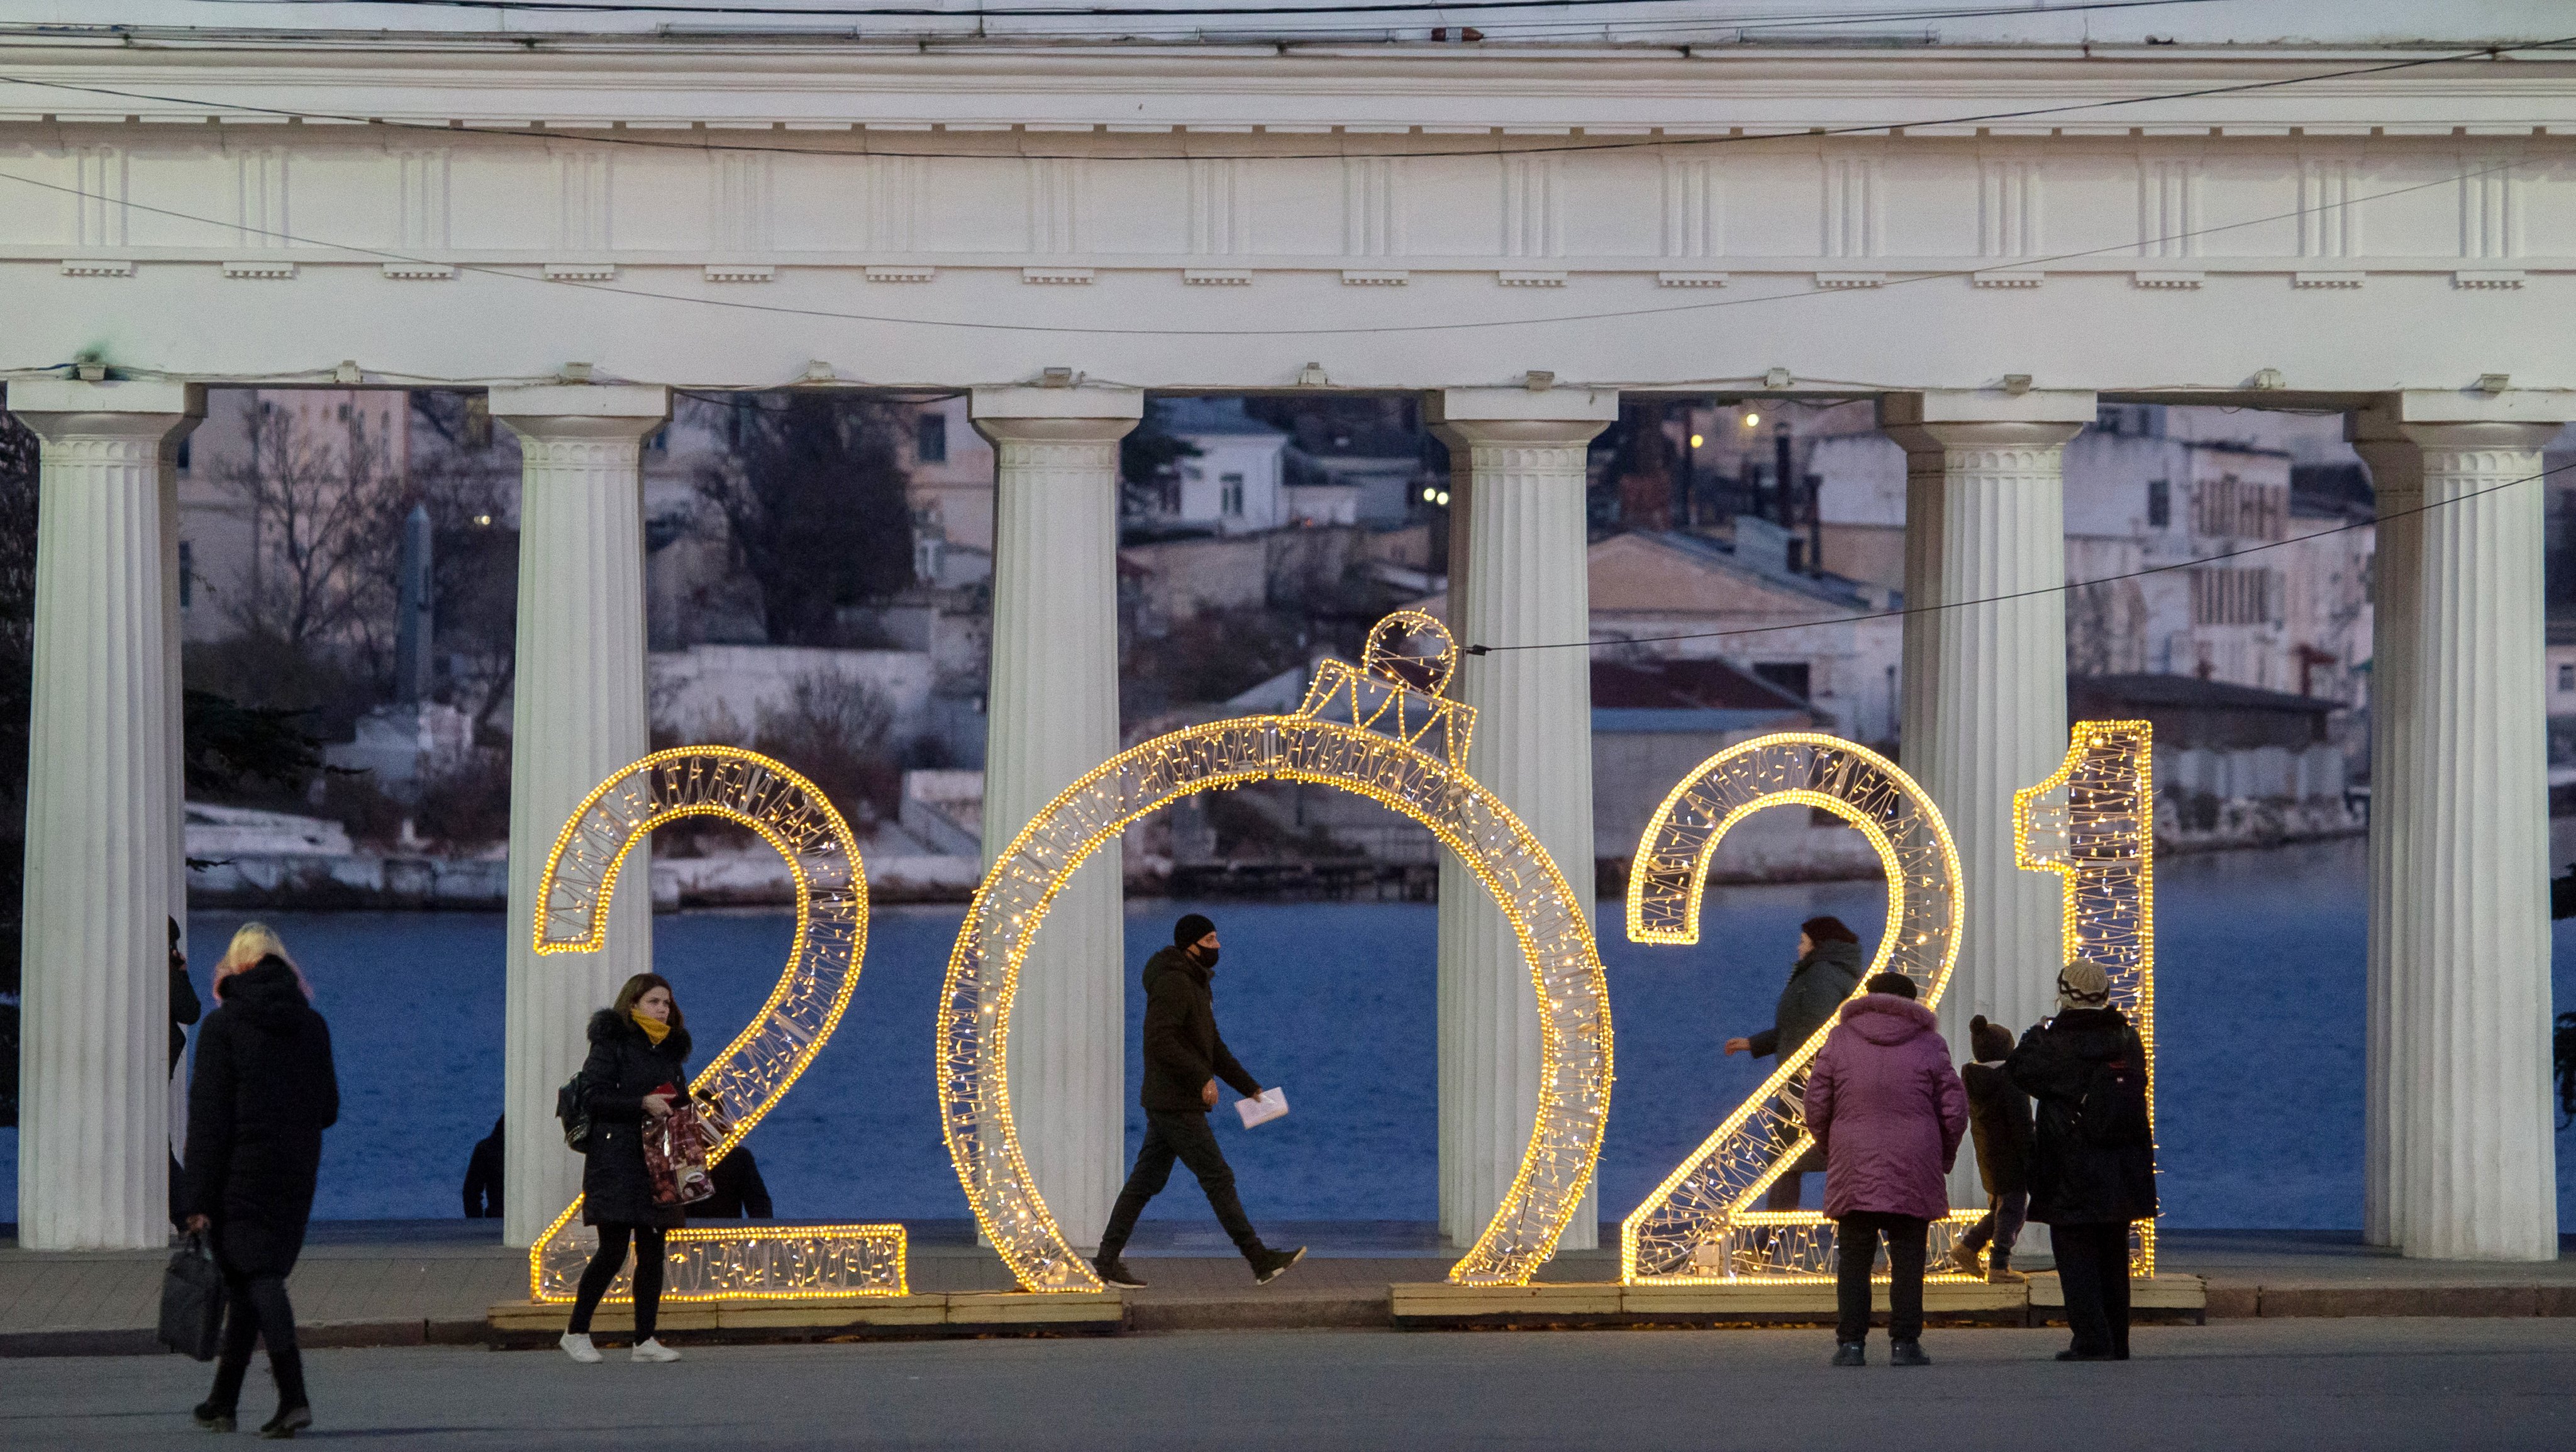 Russian city of Sevastopol decorated for winter holidays